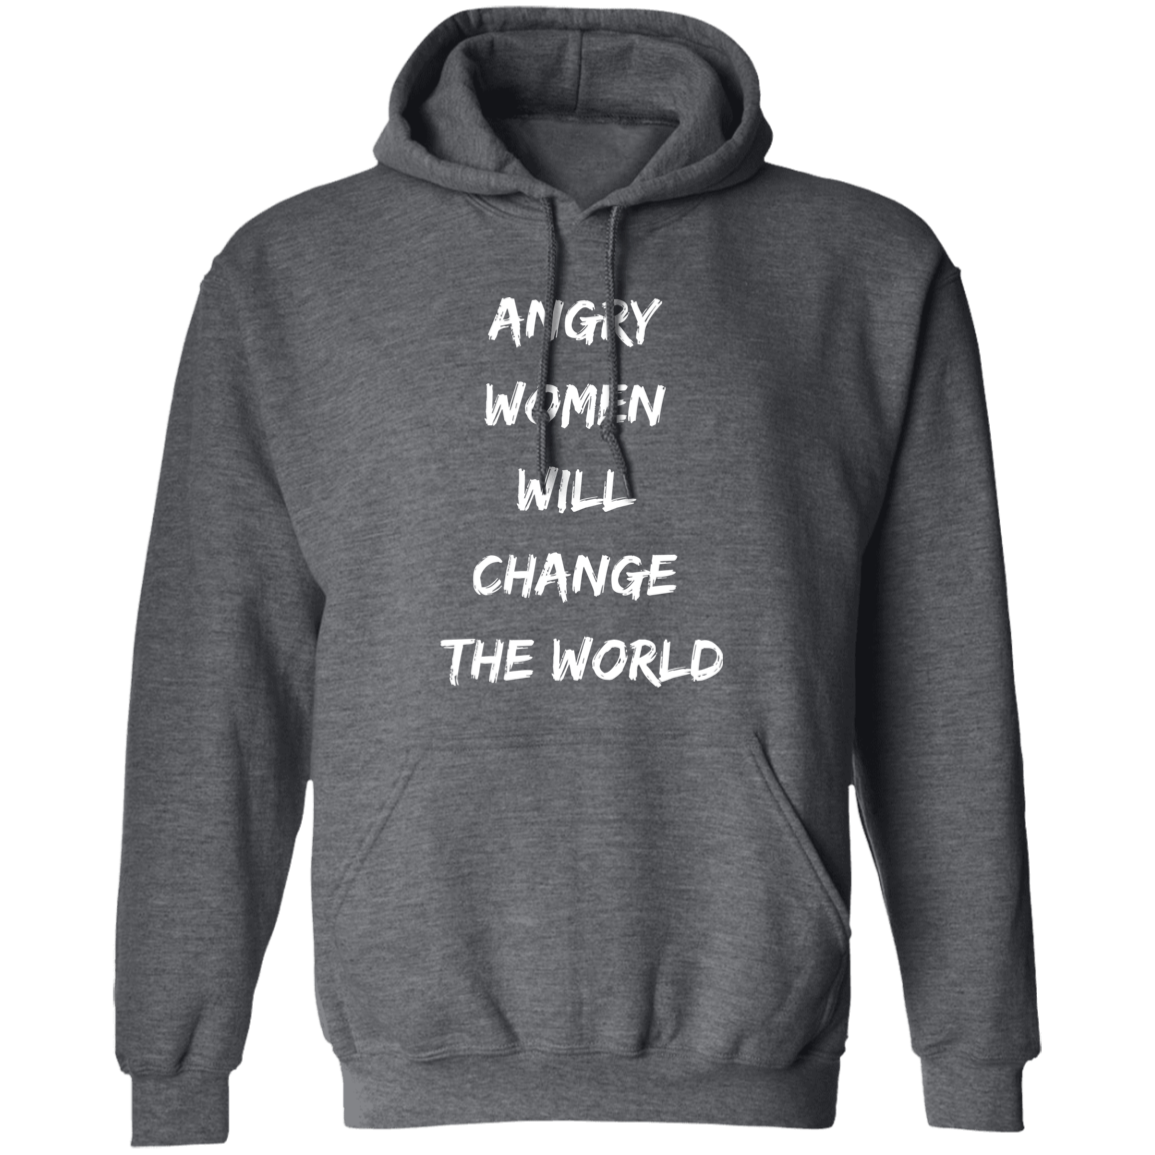 Change The World Pullover Hoodie - Unisex